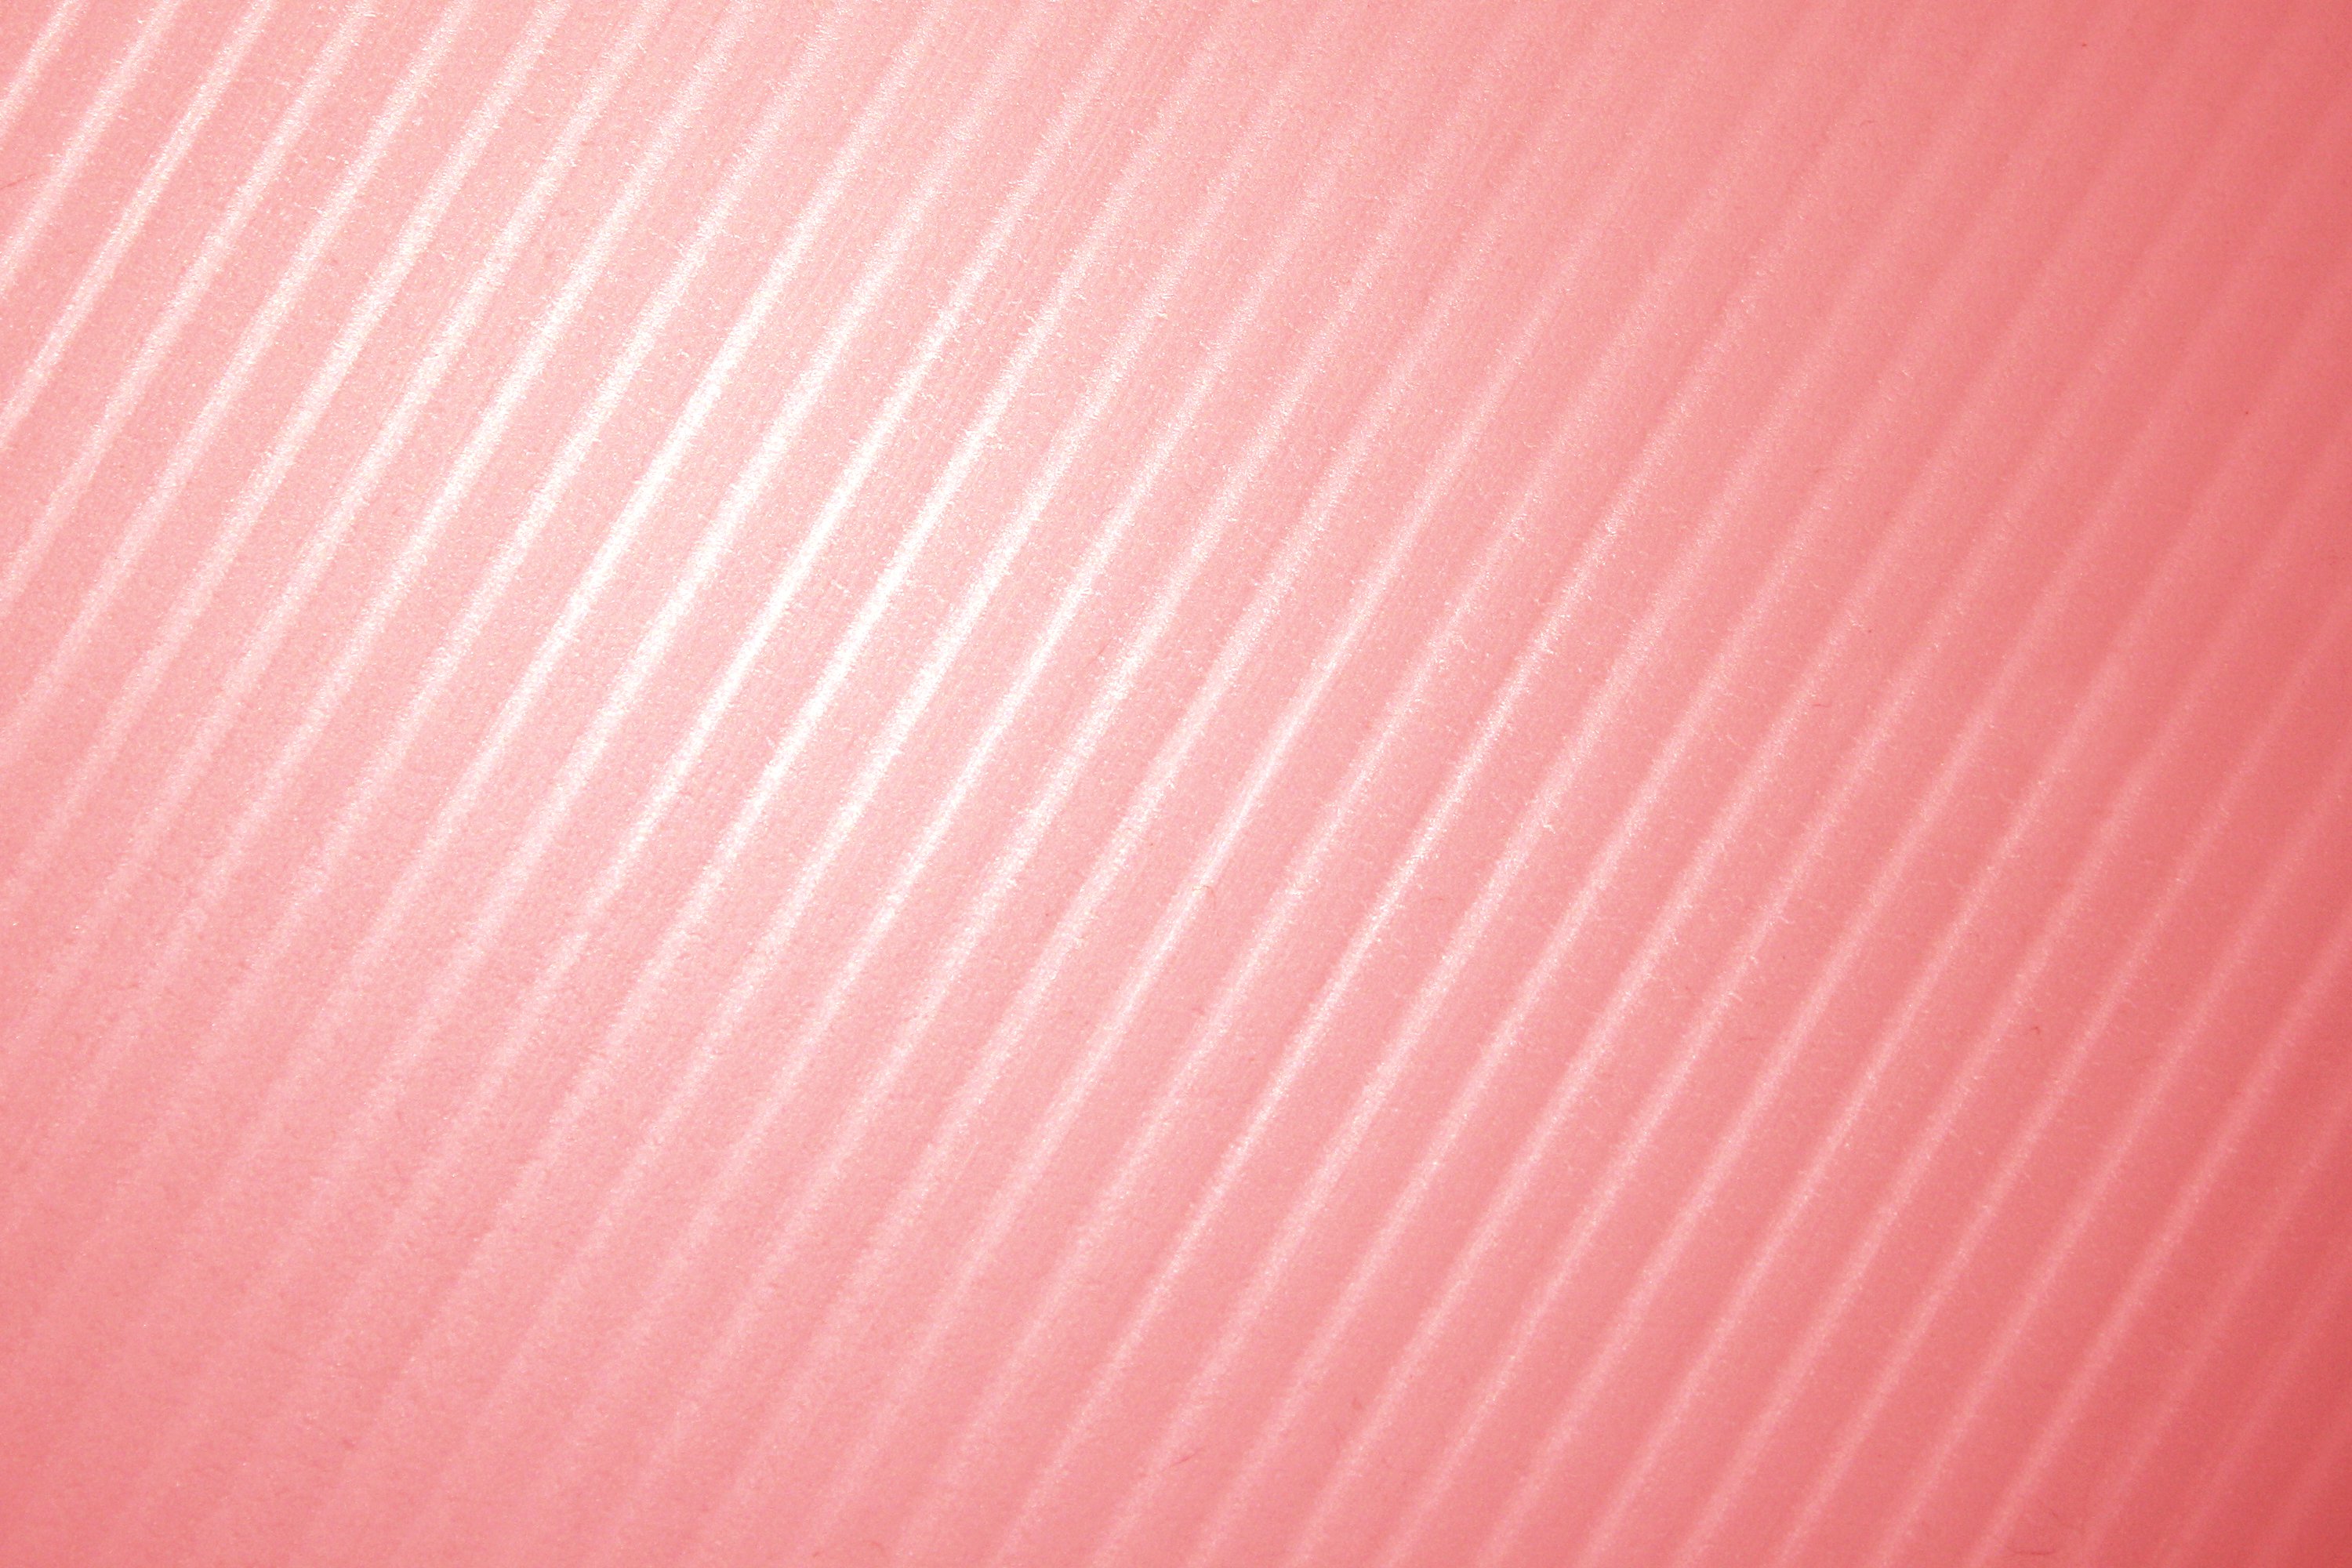 Salmon Red Diagonal Striped Plastic Texture Picture Photograph